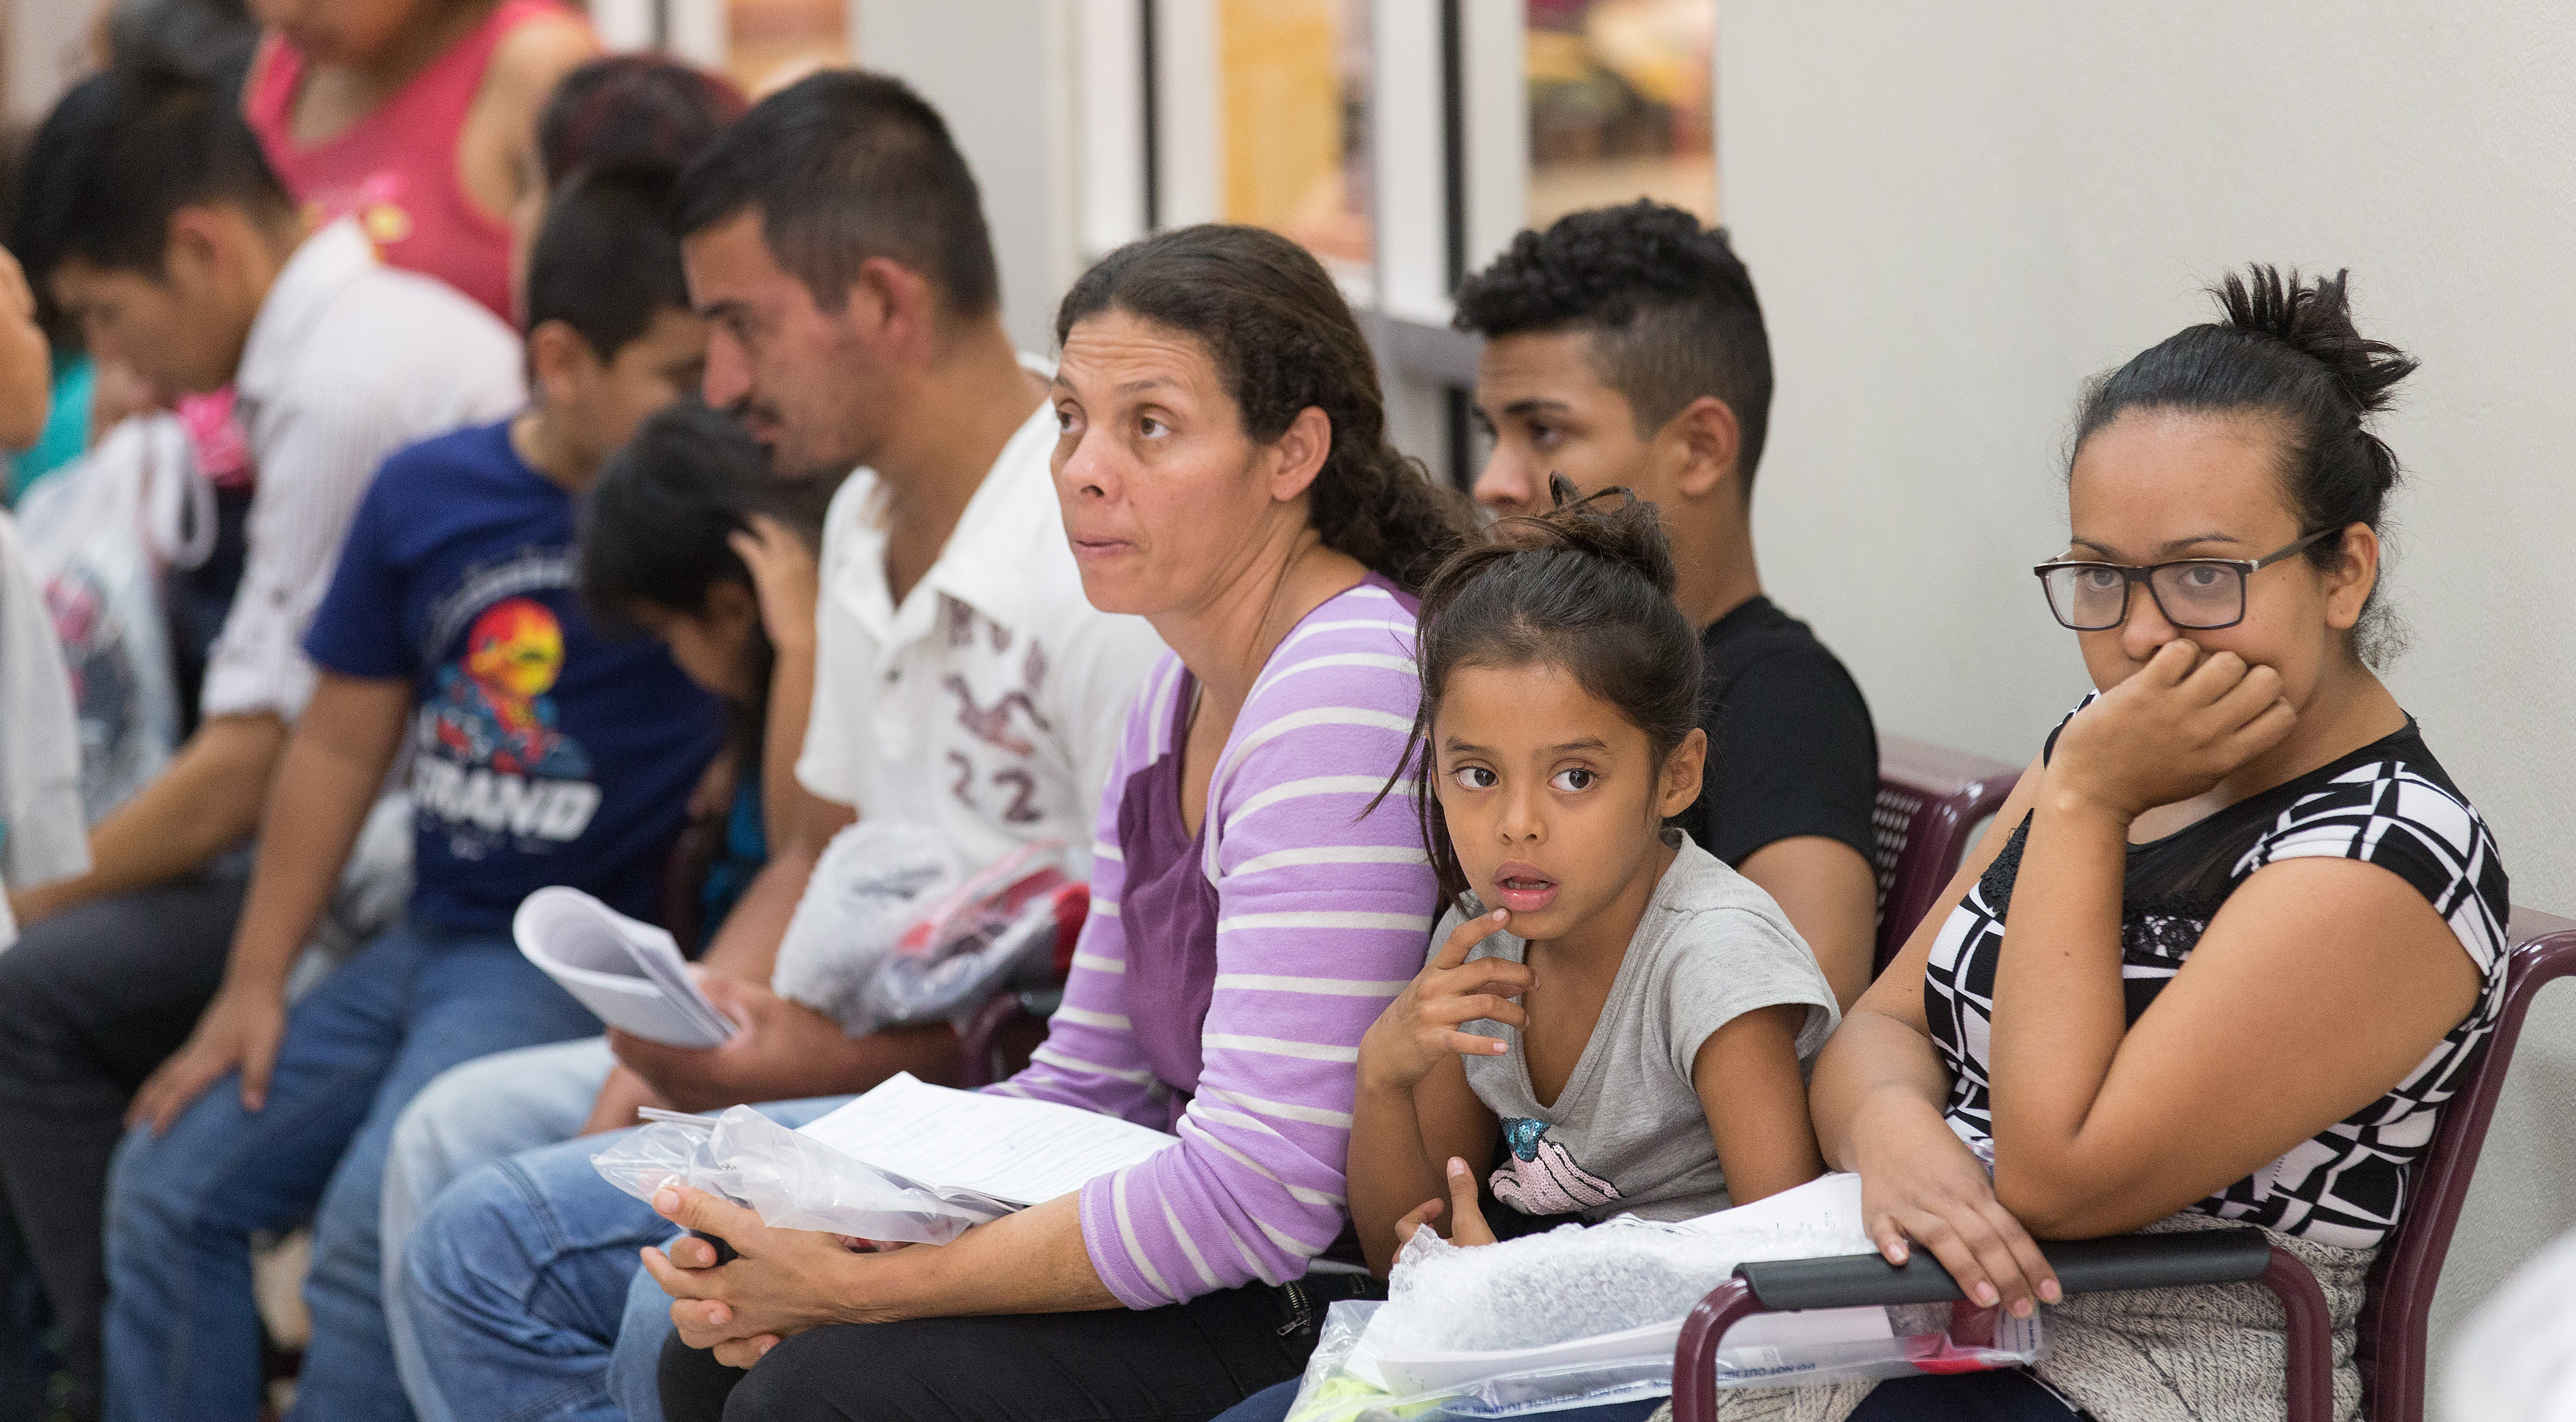 Immigrants who have just been released from a U.S. Border Patrol detention facility wait at the bus station in McAllen, Texas, in this photo from Aug. 1. Photo by Mike DuBose, UMNS.